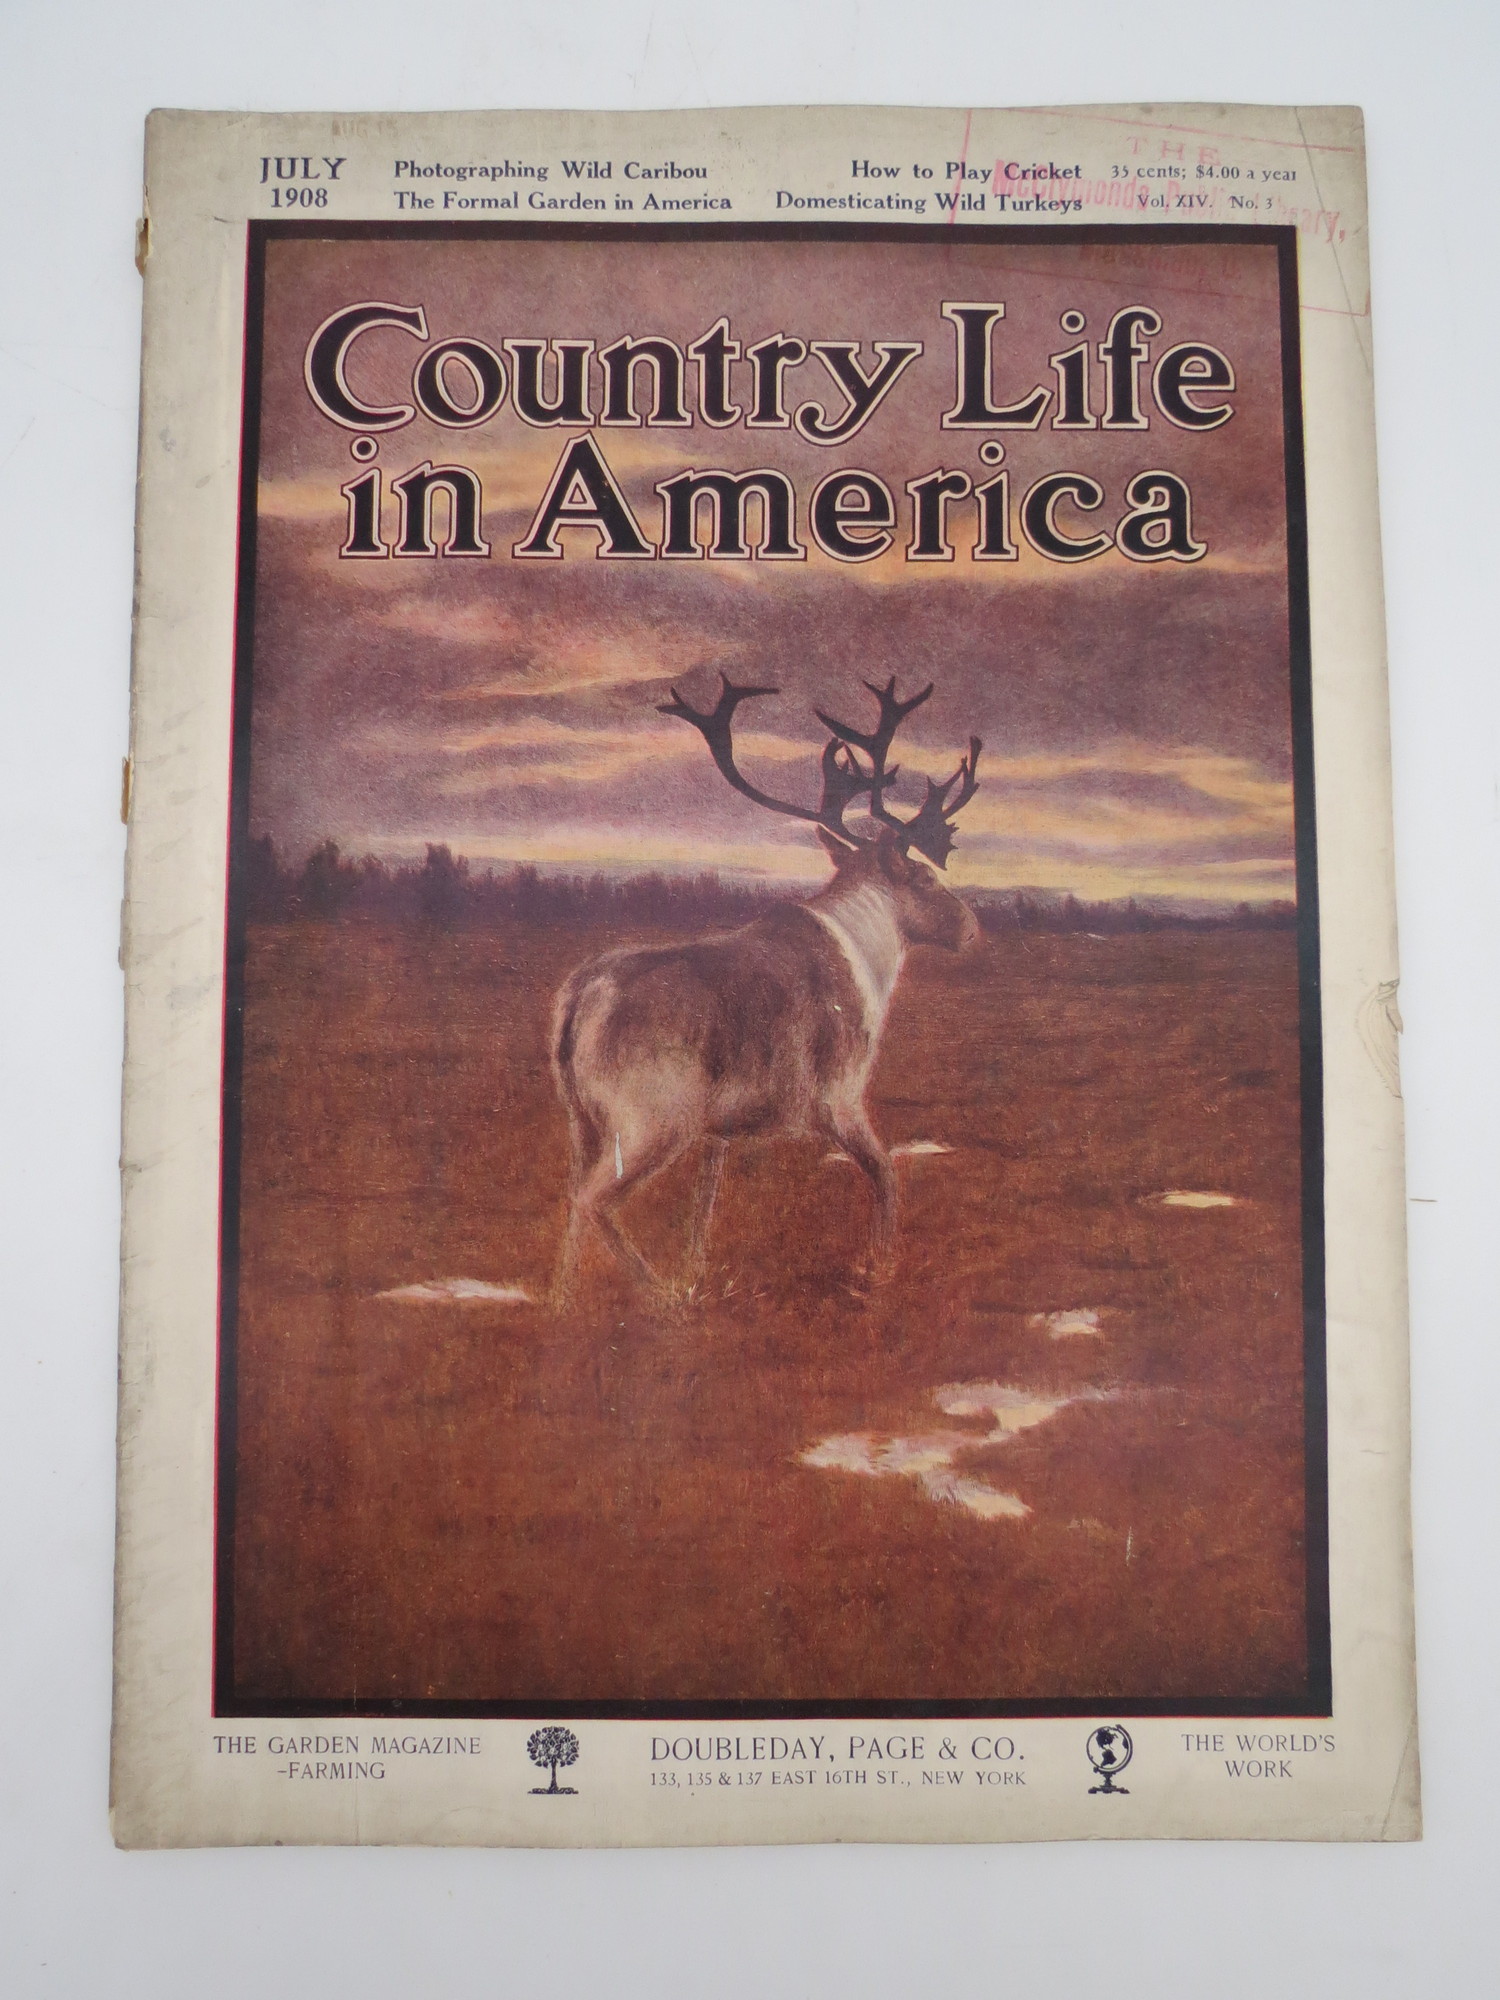 Image for COUNTRY LIFE IN AMERICA MAGAZINE, JULY 1908 (PHOTOGRAPHING WILD CARIBOU; FORMAL GARDEN IN AMERICA)